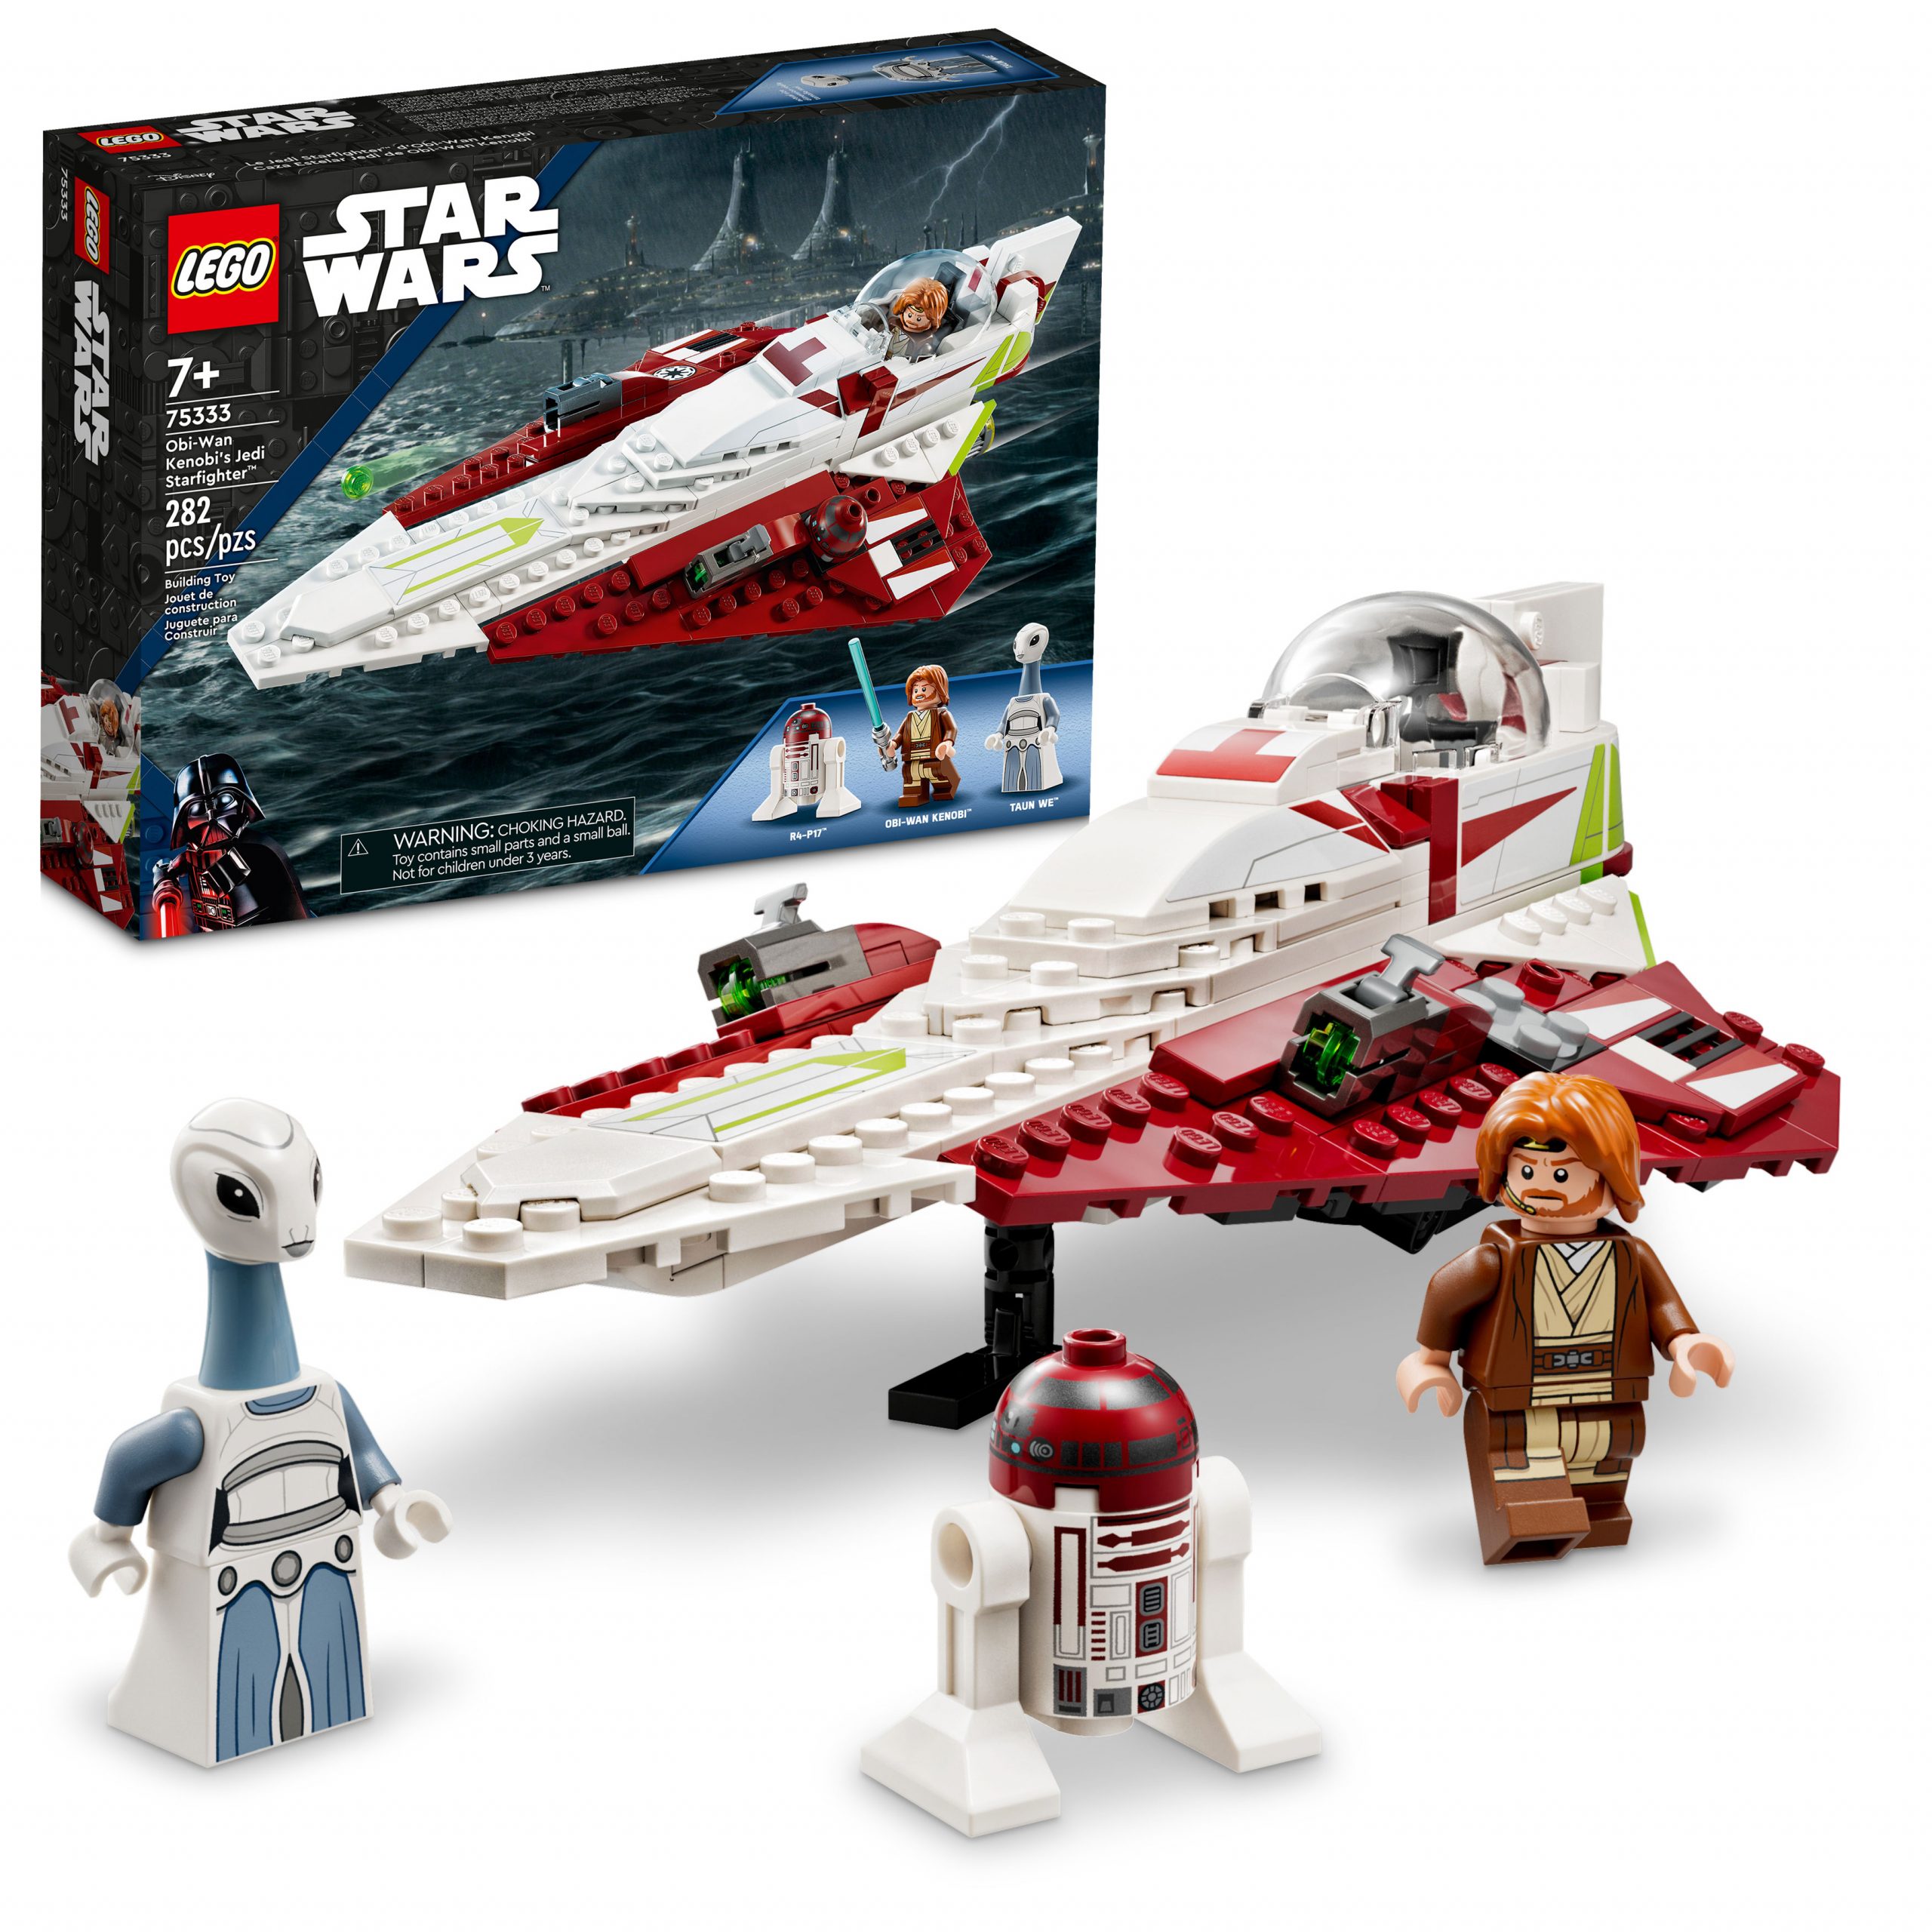 LEGO Star Wars Jedi: Fallen Order and Andor sets unveiled at Star